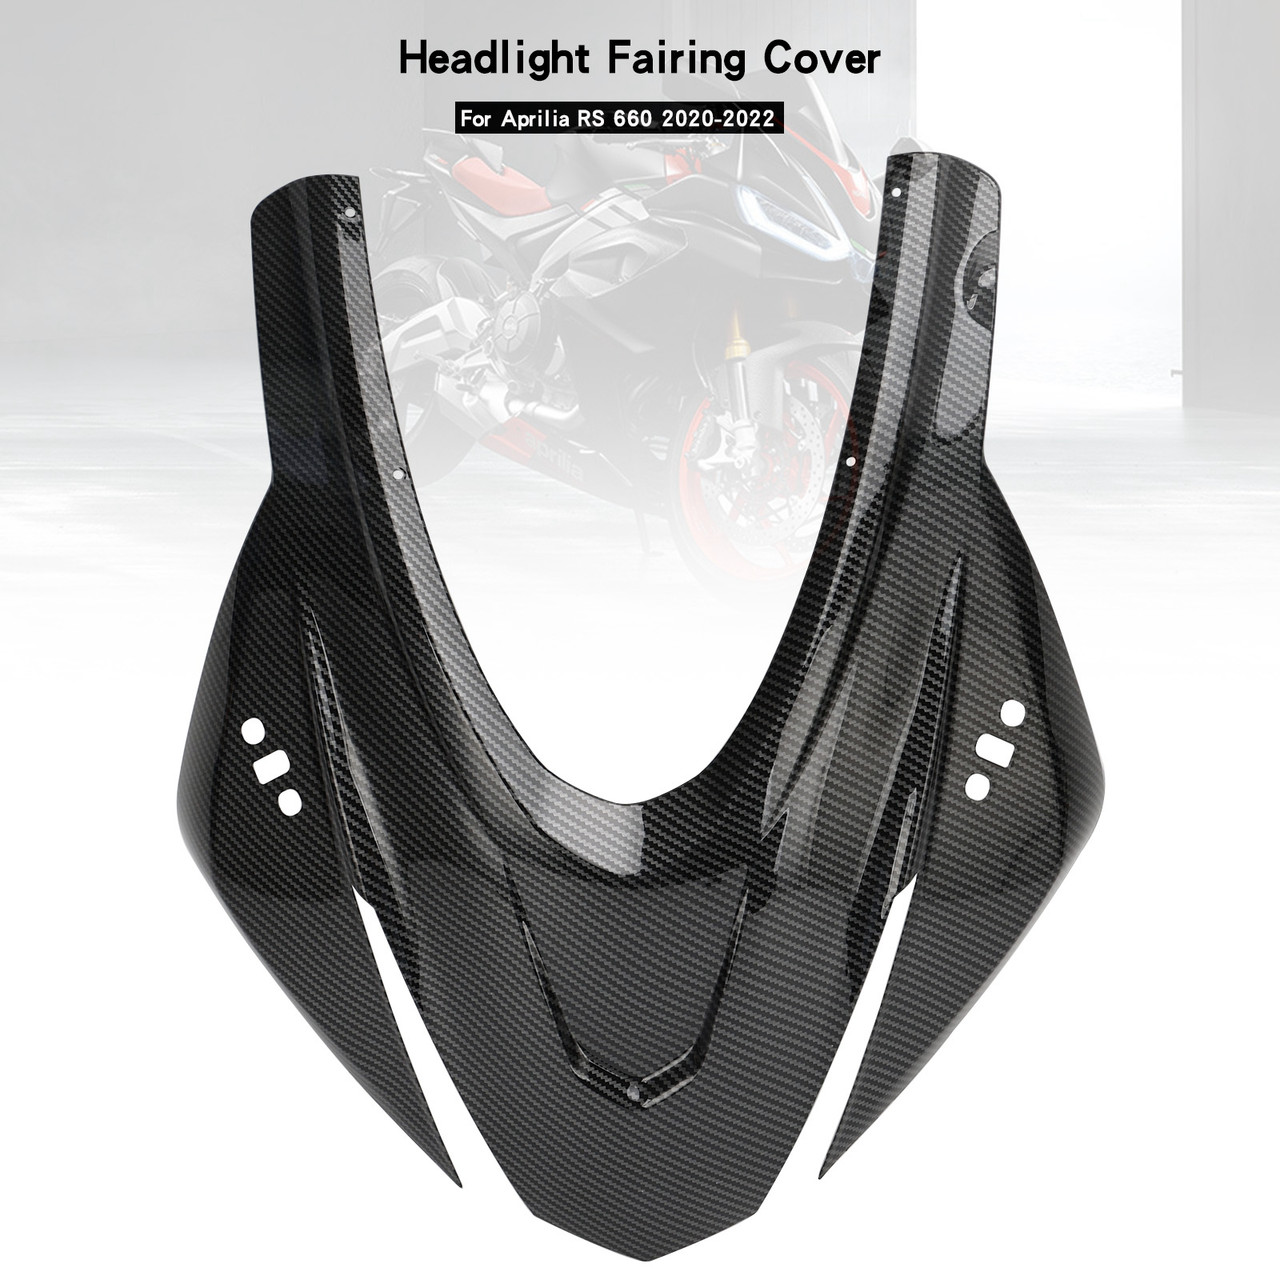 Carbon Front Headlight Hood Nose Fairing Cover For Aprilia RS 660 2020-2022